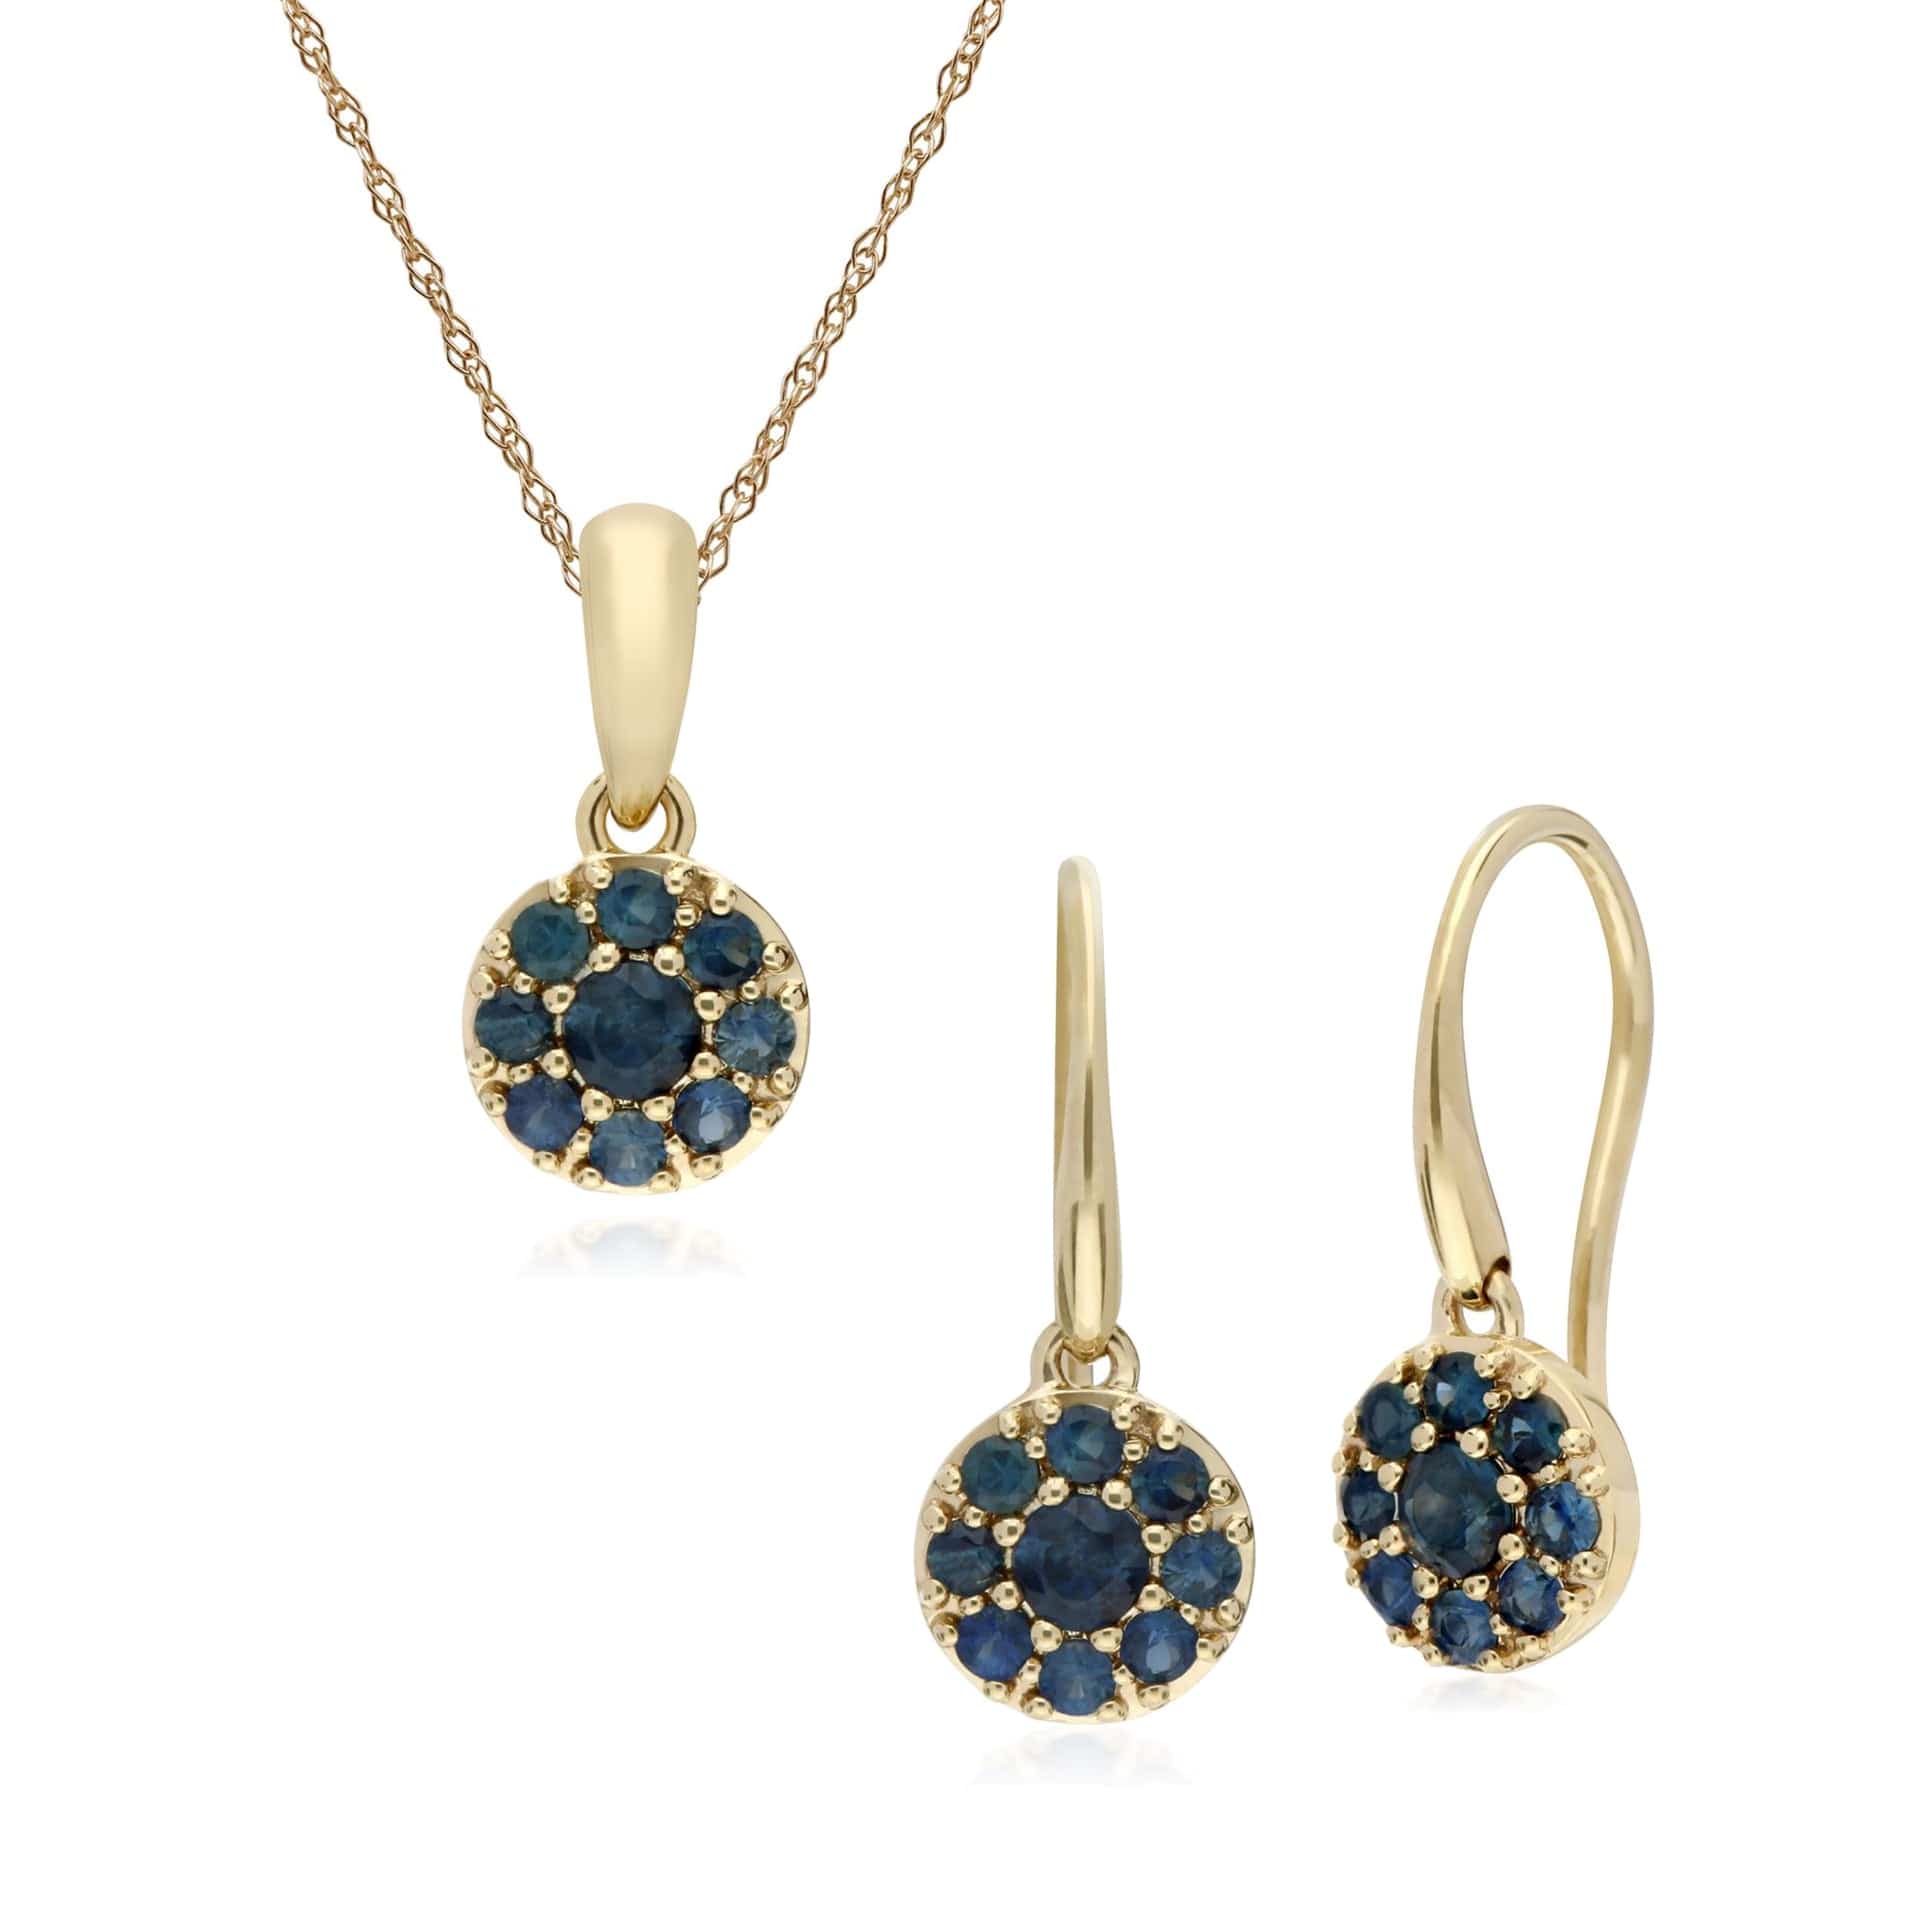 135E1573029-135P1910029 Classic Round Sapphire Cluster Drop Earrings & Pendant Set in 9ct Yellow Gold 1